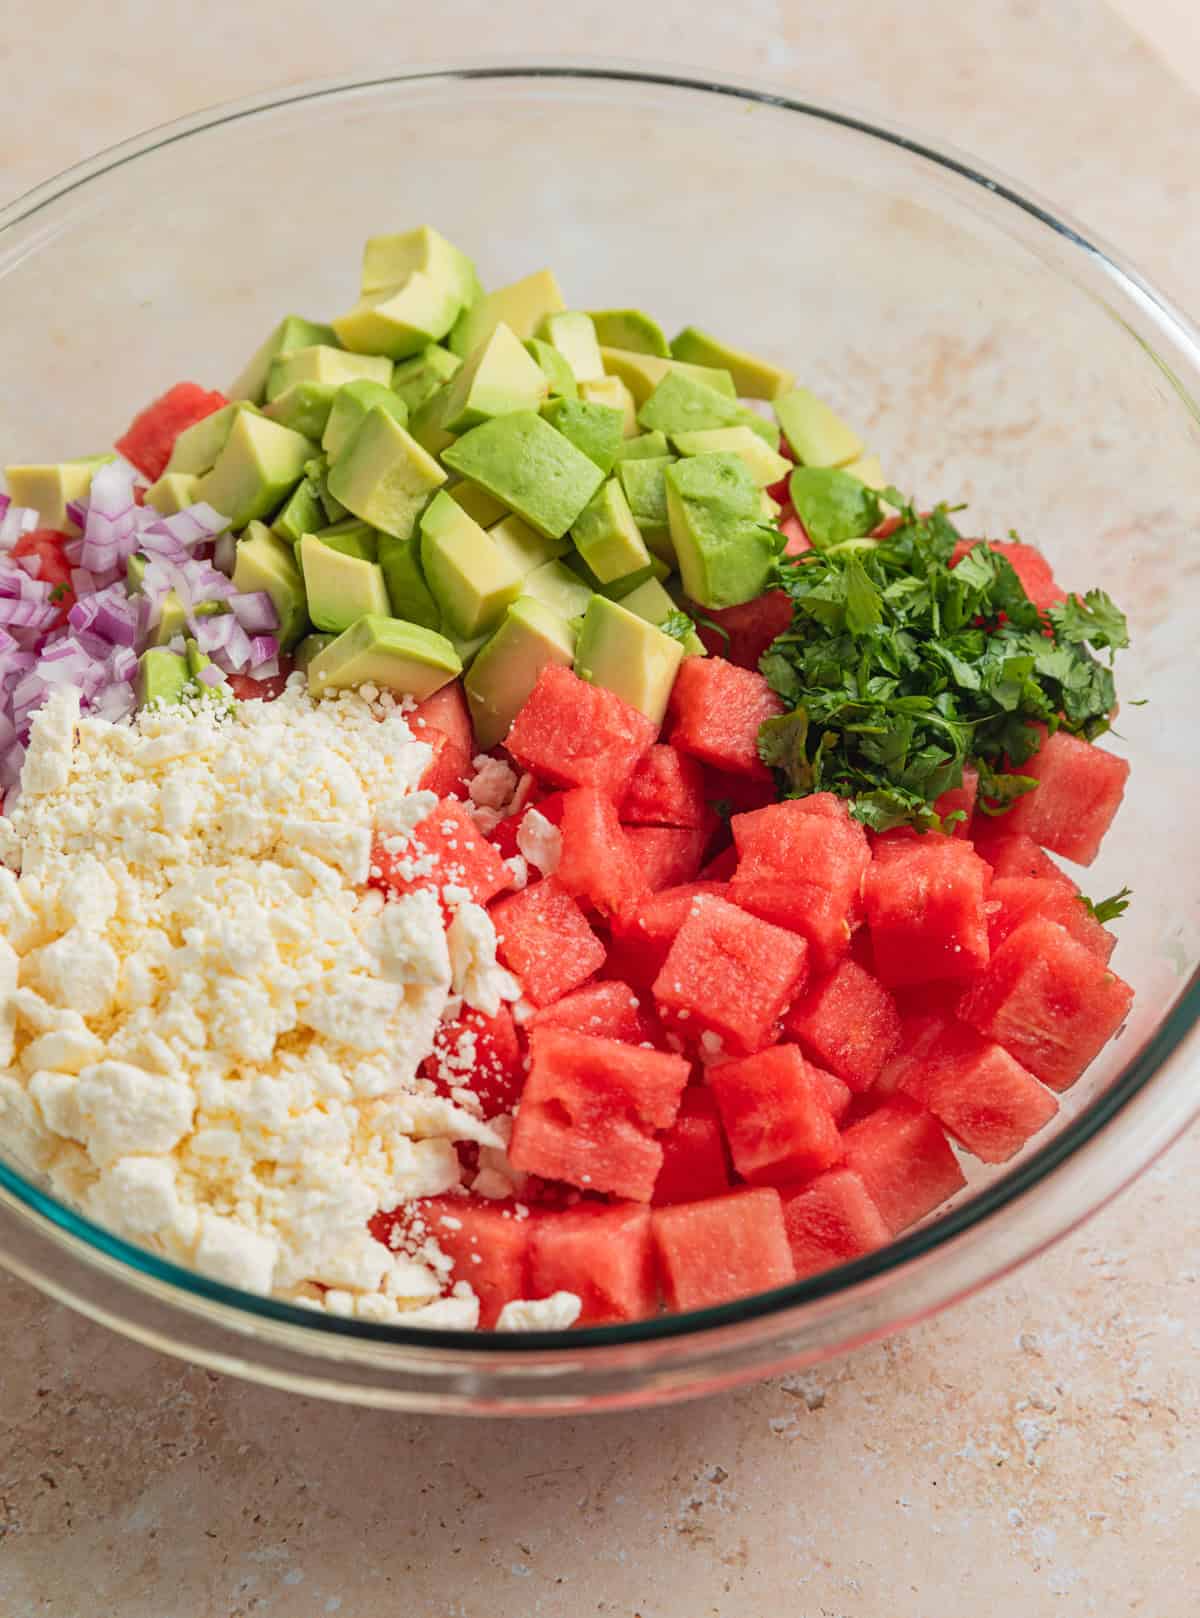 Diced avocado, feta cheese crumbles, cilantro, onion and watermelon cubes in glass bowl before mixing.